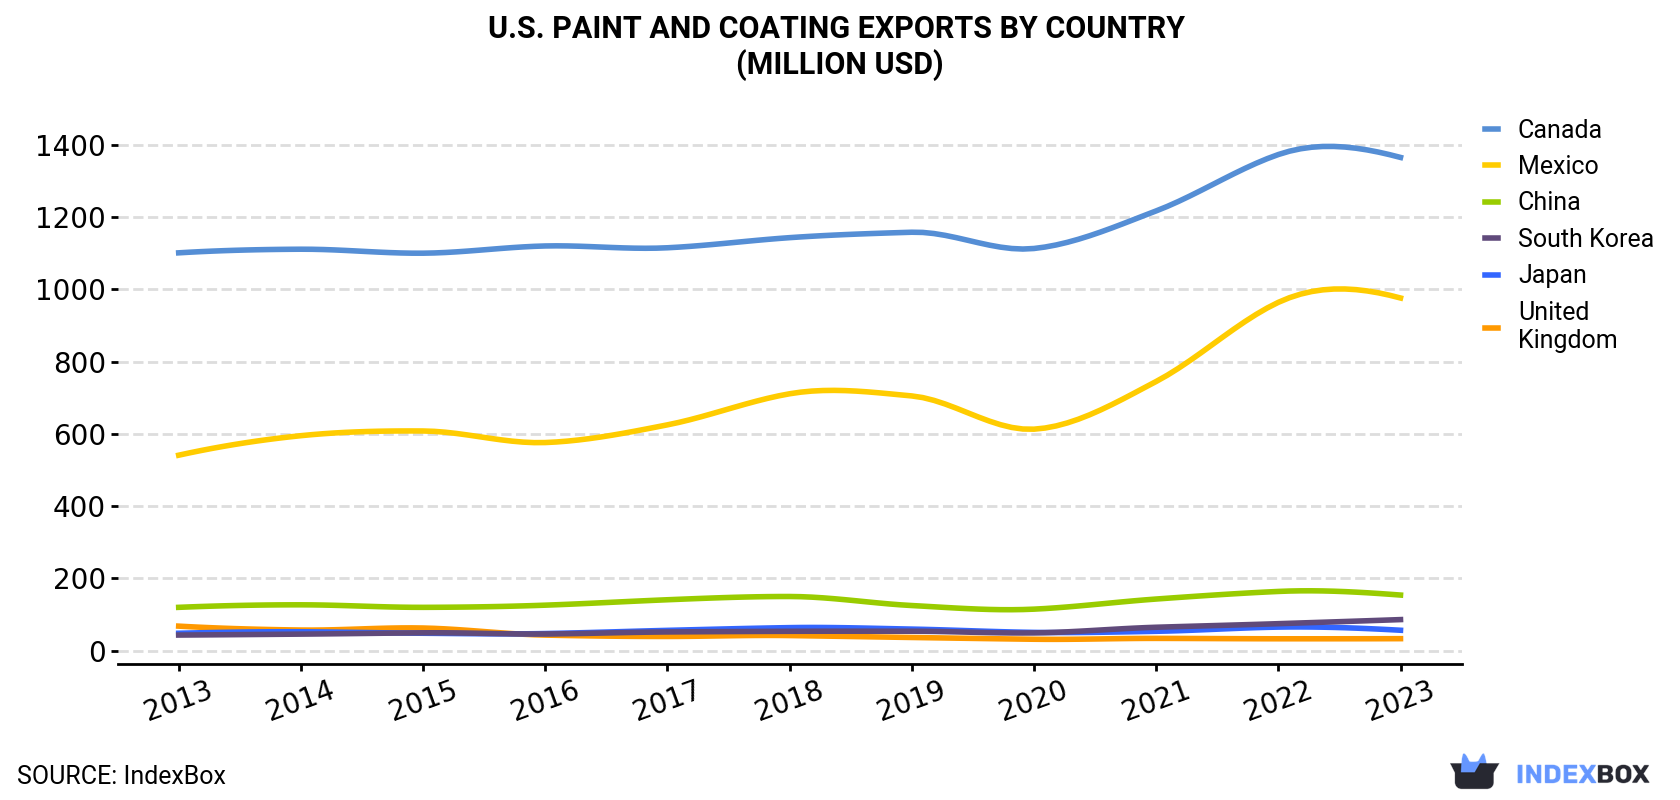 U.S. Paint And Coating Exports By Country (Million USD)